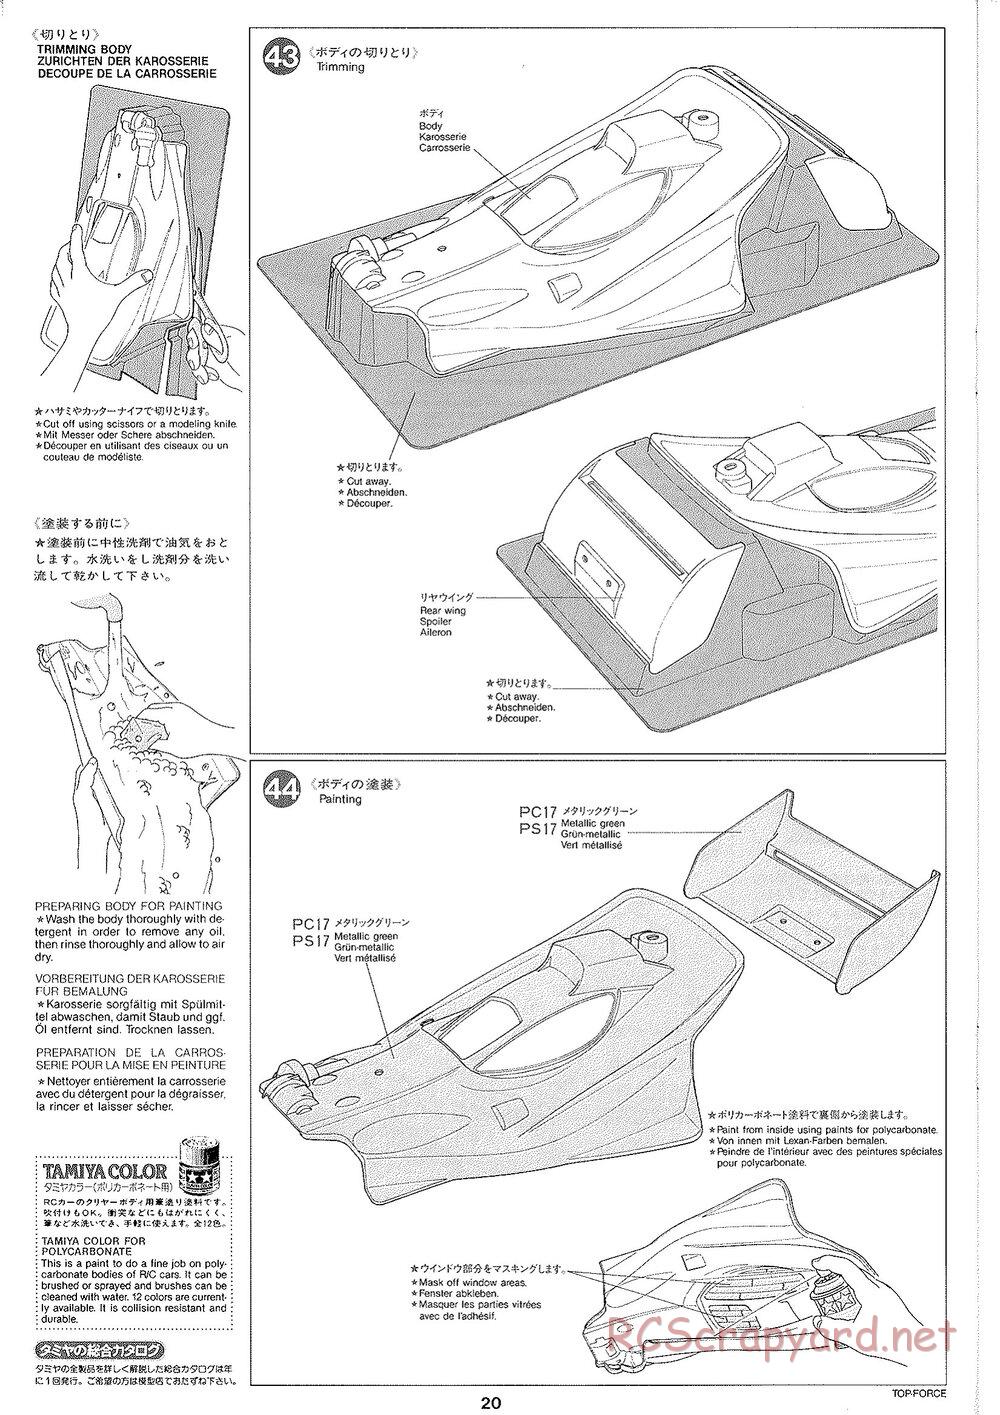 Tamiya - Top Force 2005 - DF-01 Chassis - Manual - Page 20